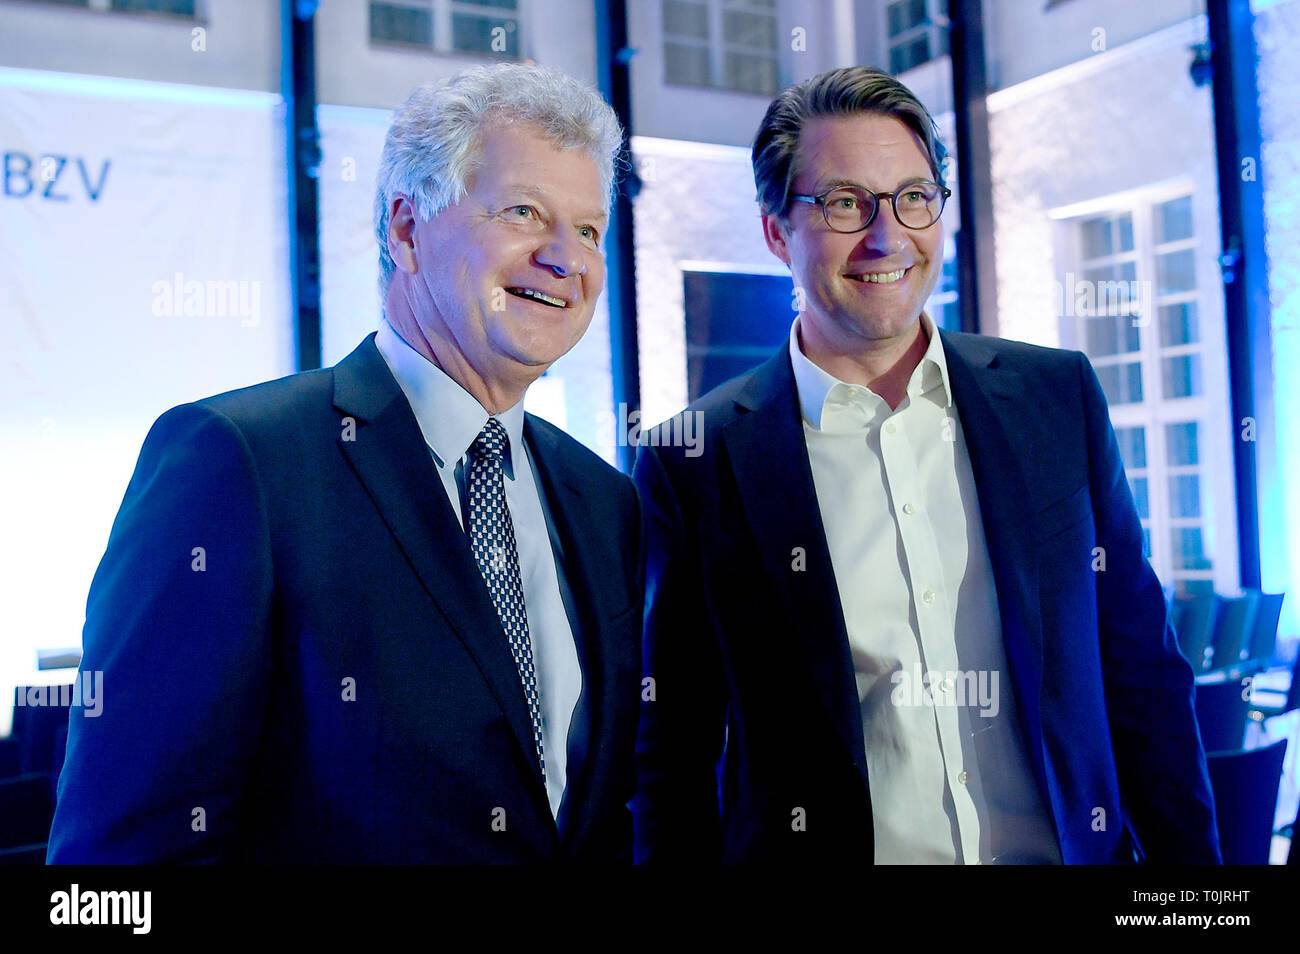 Berlin, Germany. 20th Mar, 2019. Andreas Scherer (l), Chairman of the VBZV  and Andreas Scheuer (CSU), Federal Minister of Transport, at the annual  meeting of the Association of Bavarian Newspaper Publishers (VBZV).